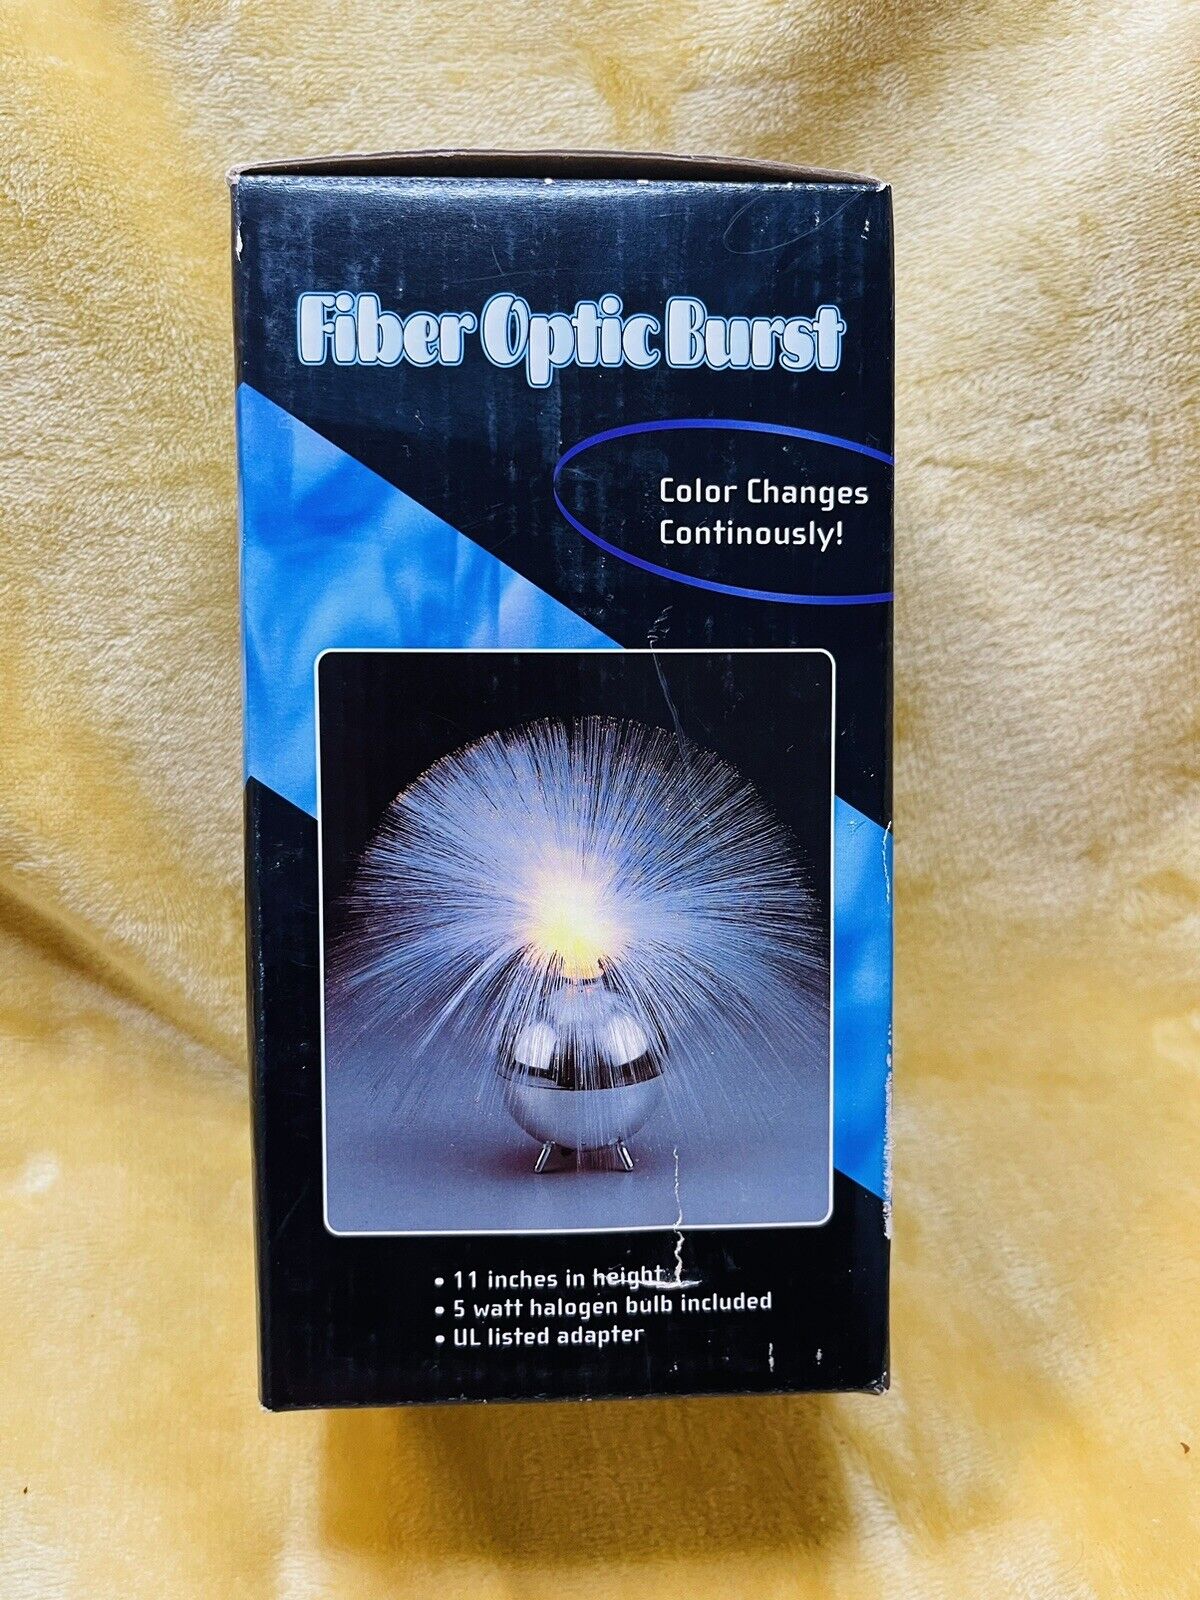 Vintage Fiber Optic Burst Lamp Color Changing 11” New Old Stock Open Box Tested